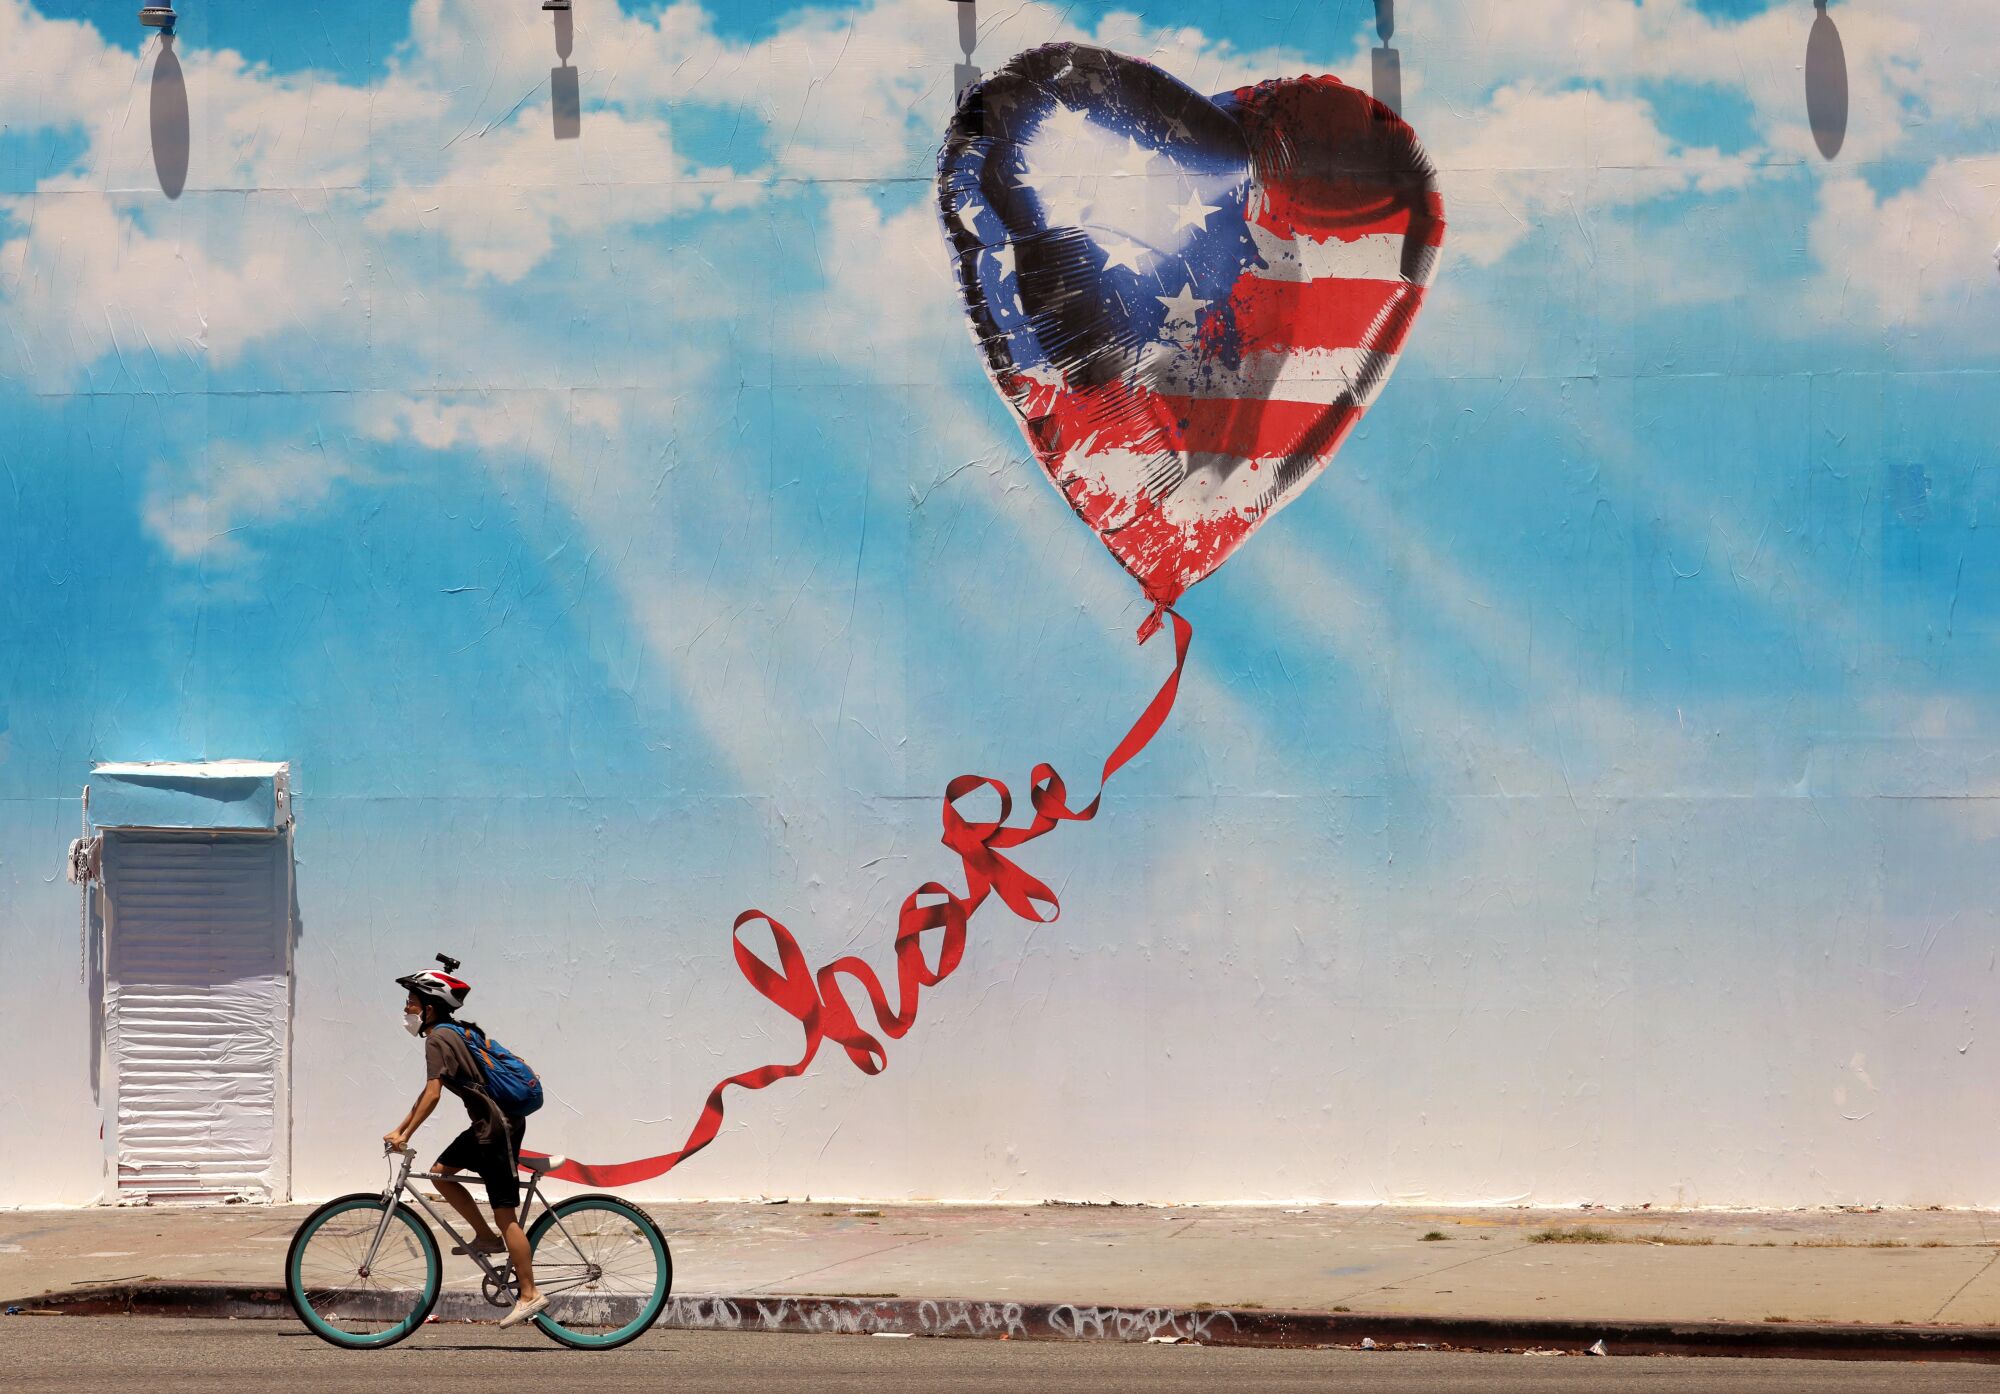 A cyclist rides past a mural of a heart-shaped U.S. flag balloon with a long ribbon that curls to spell out "hope."